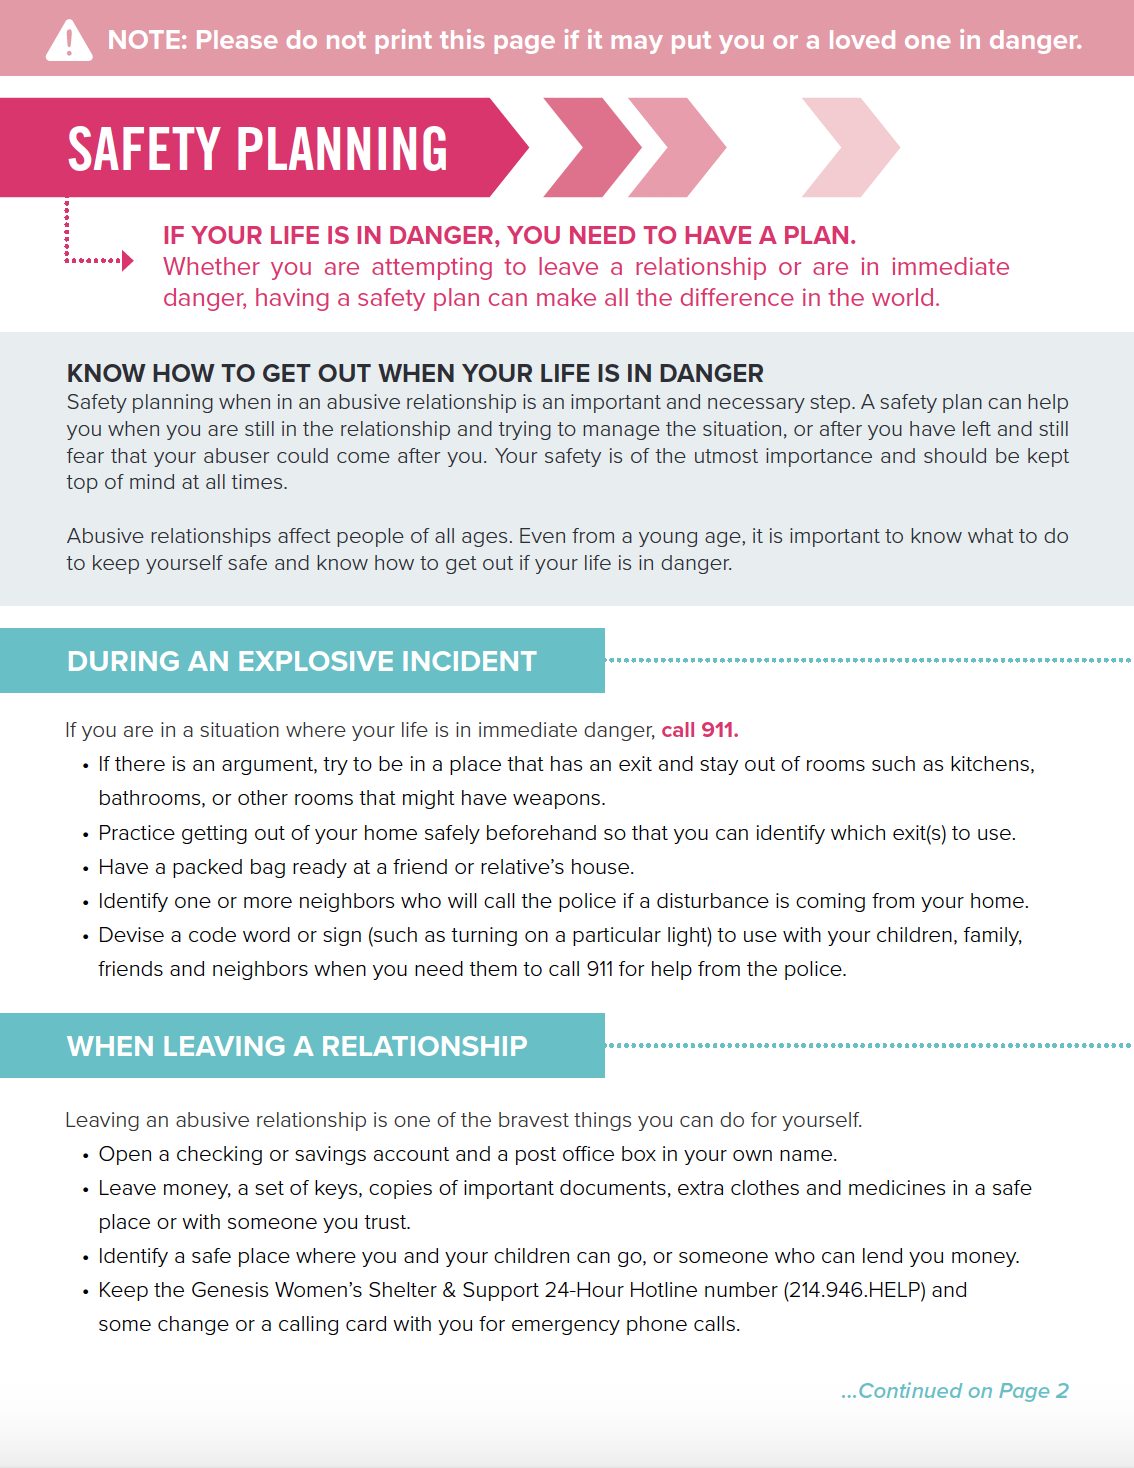 Safety planning document for women experiencing domestic violence